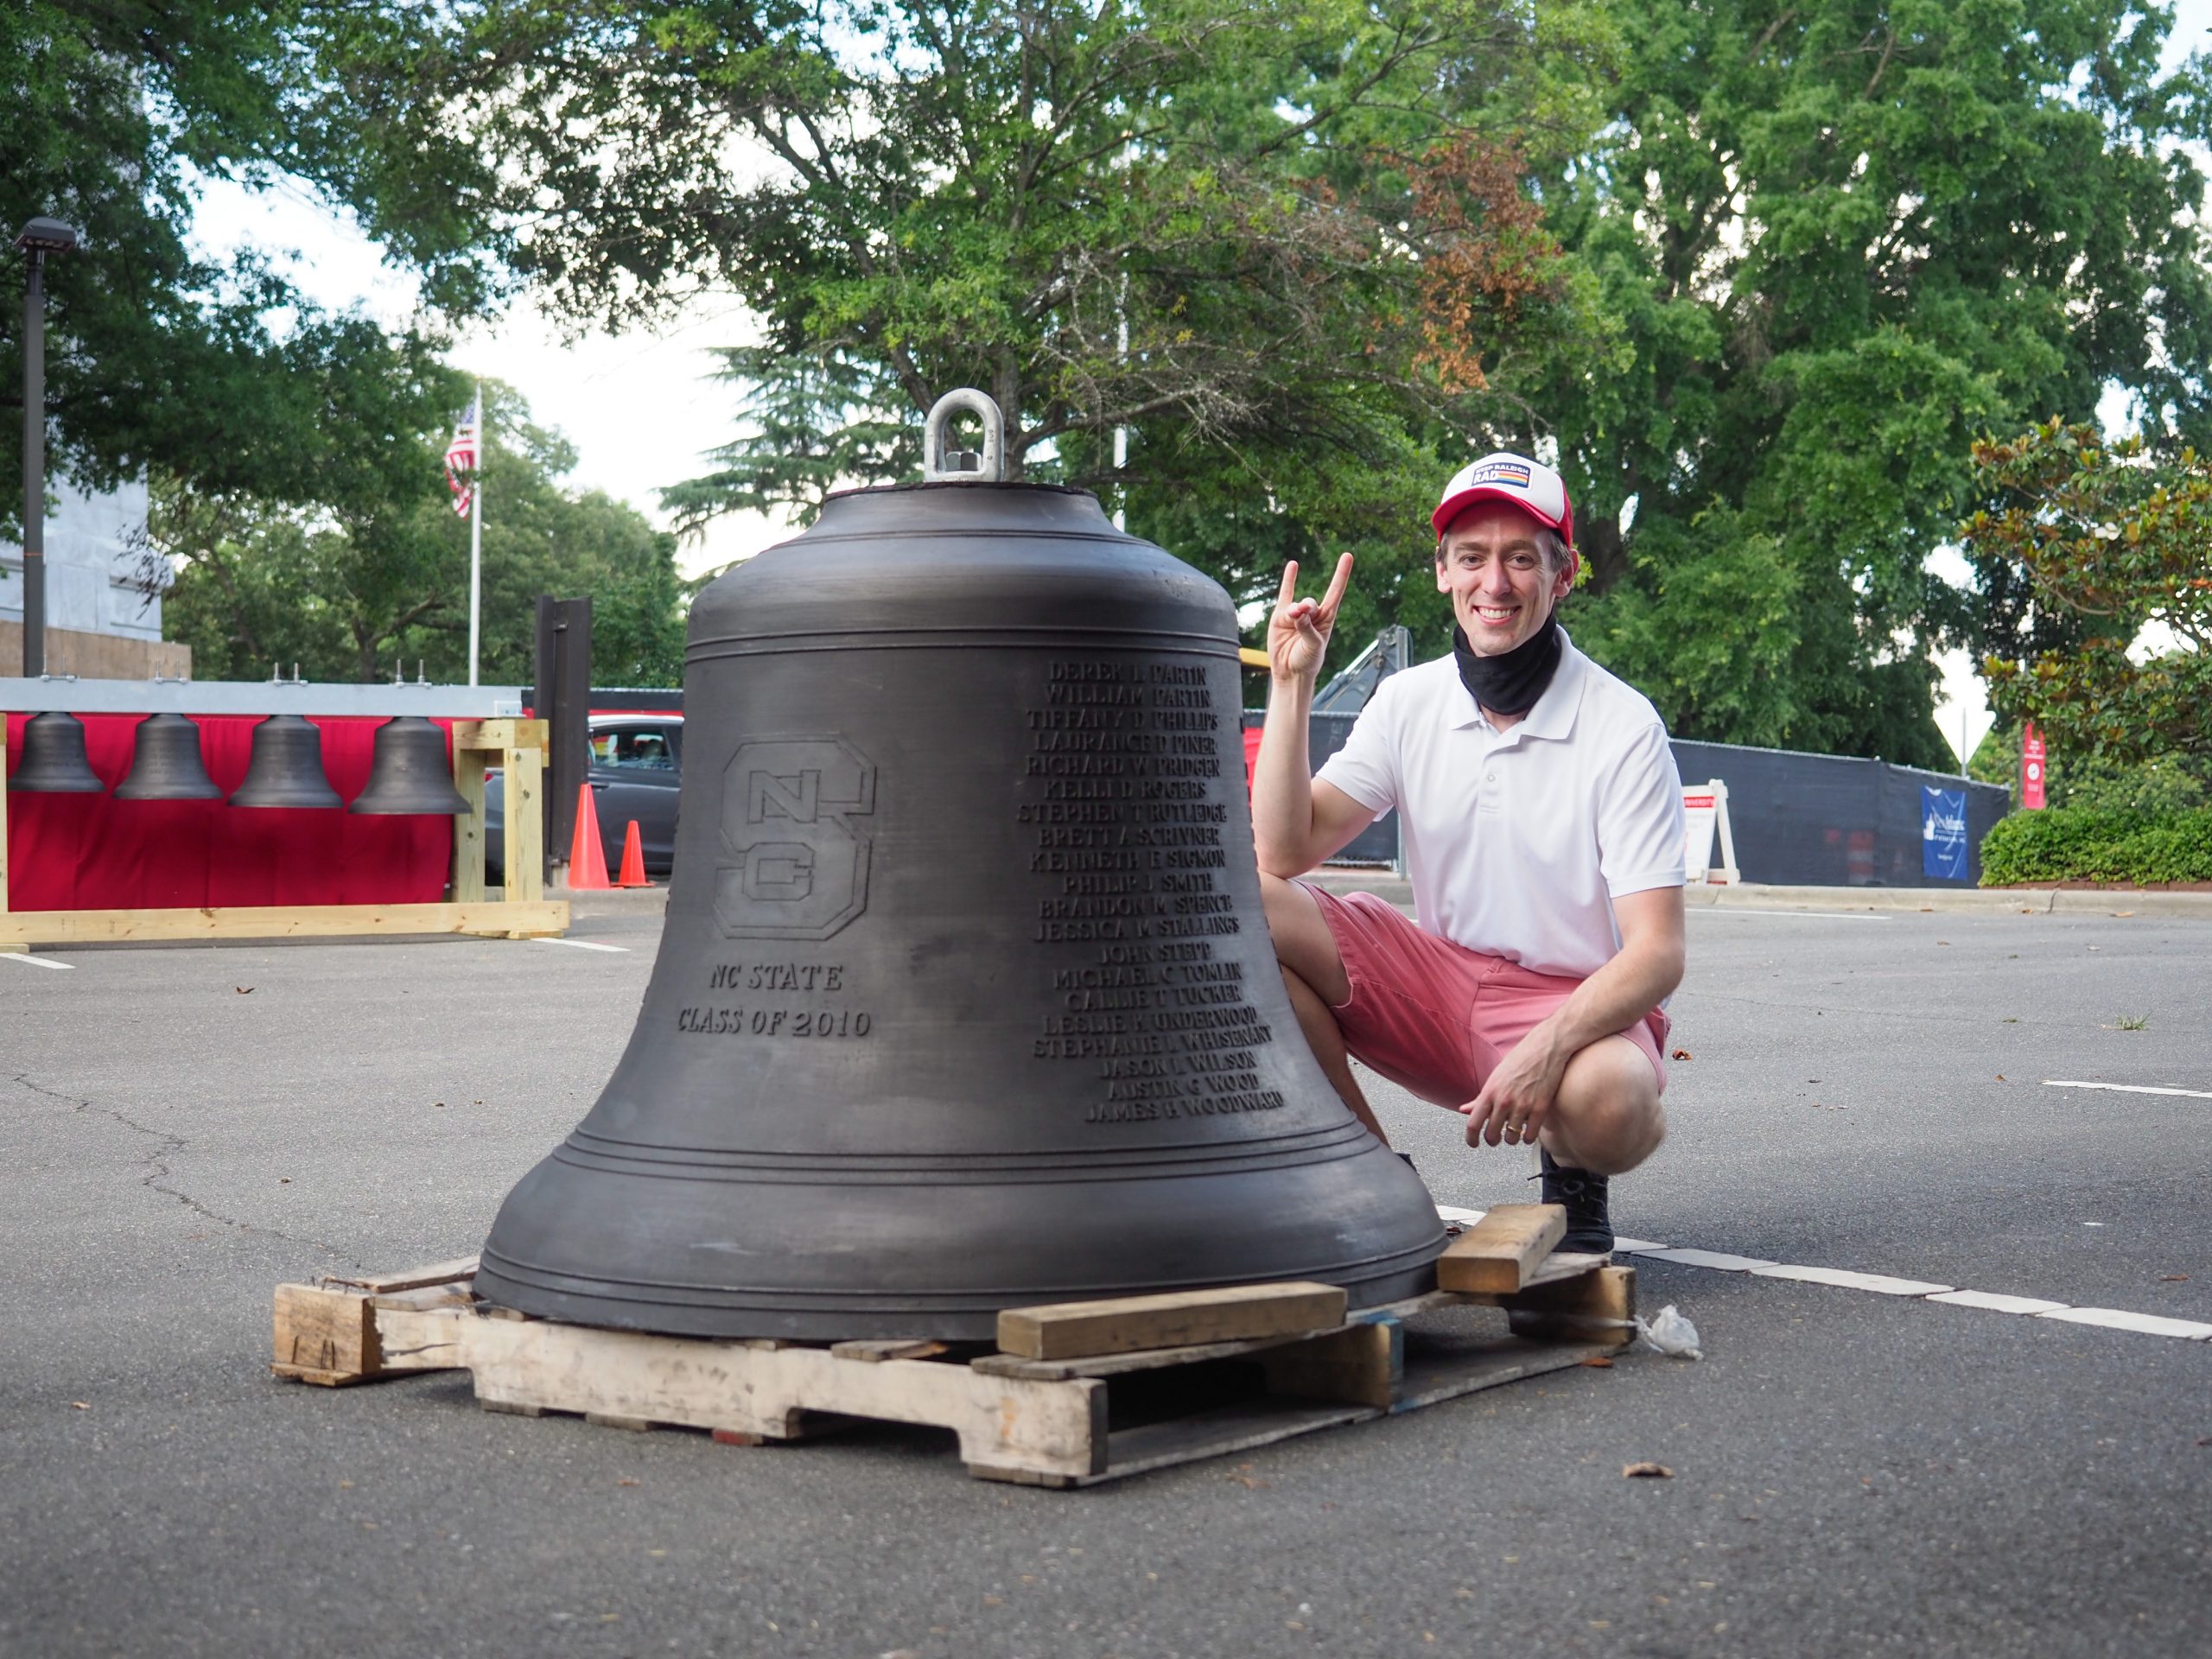 Dr. Stafford poses proudly with the bell engraved in his honor